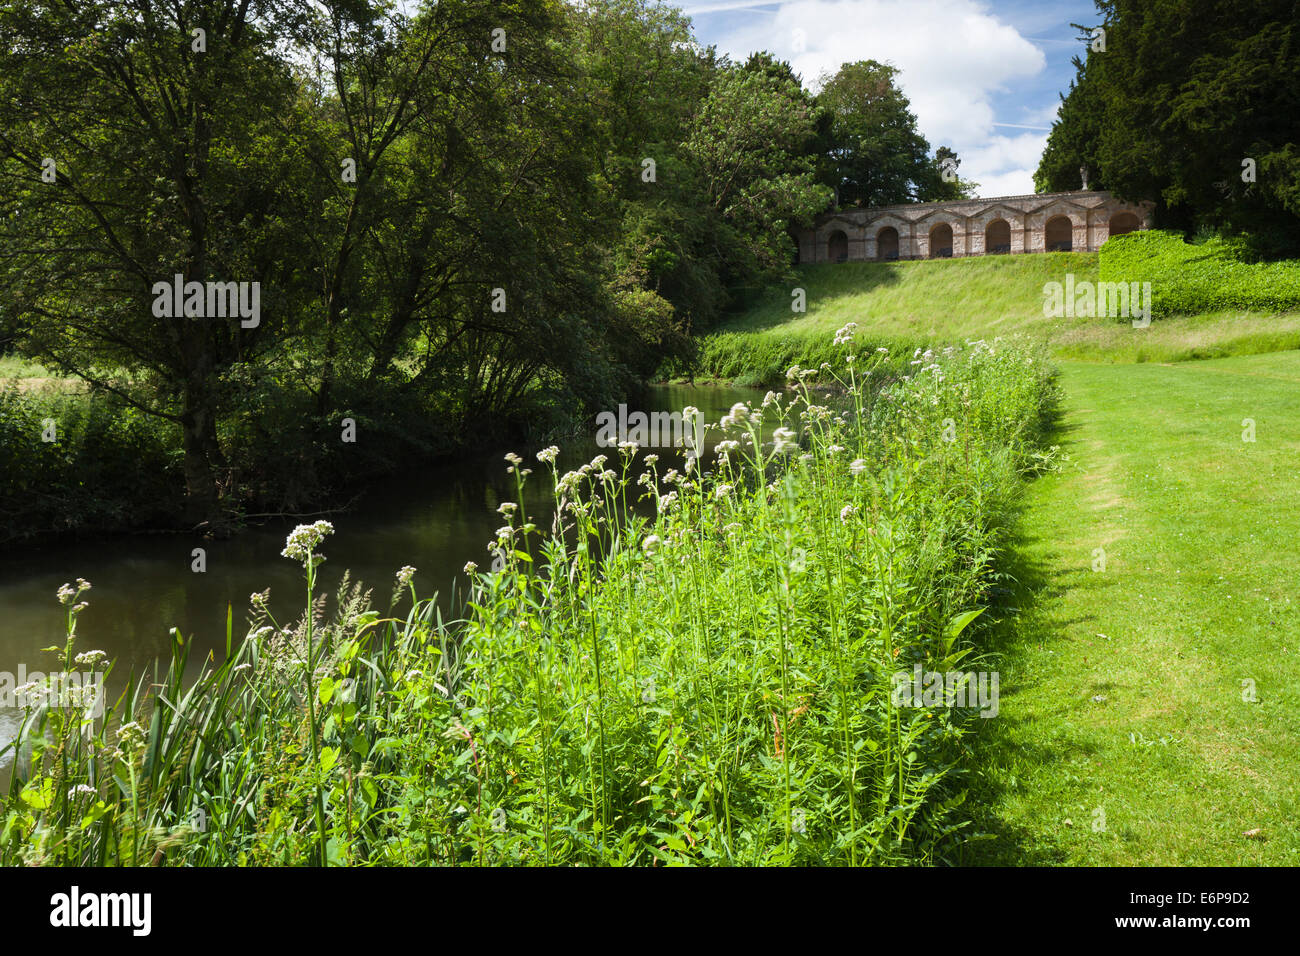 The seven-arch arcade designed by William Kent seen from beside the River Cherwell at Rousham House in Oxfordshire, England Stock Photo